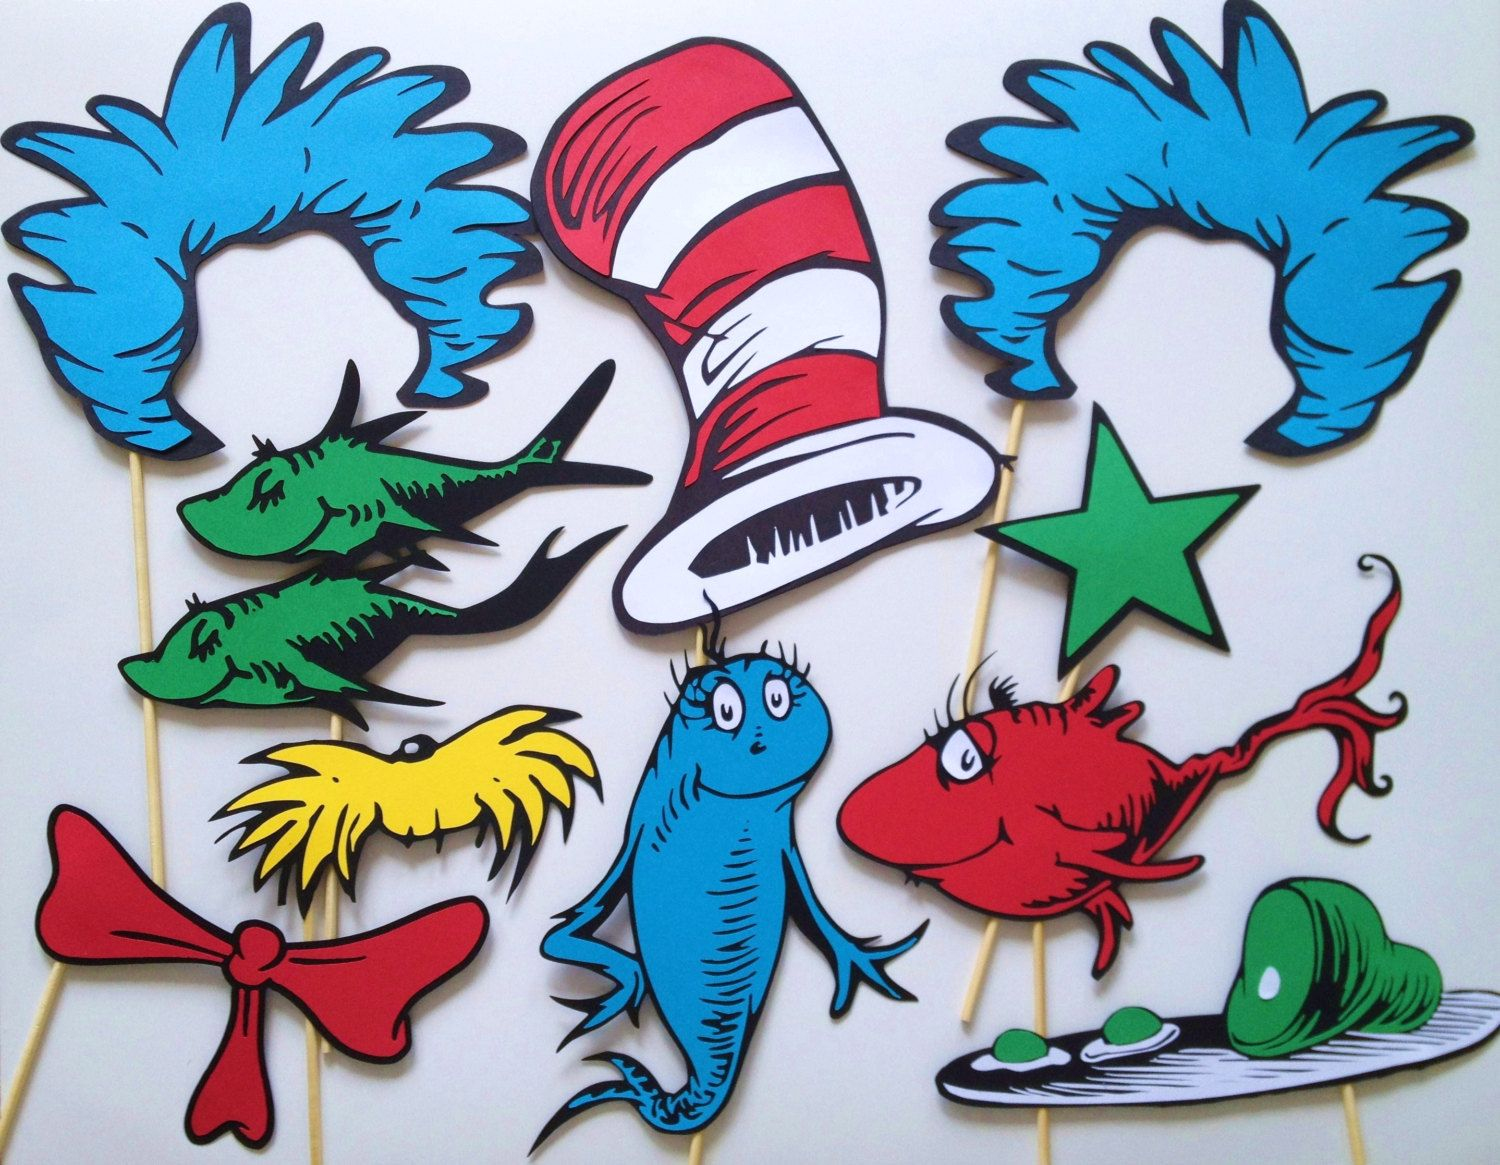 Printable Seussical Photo Props 12 Pieces By CleverMarten On Etsy 8 